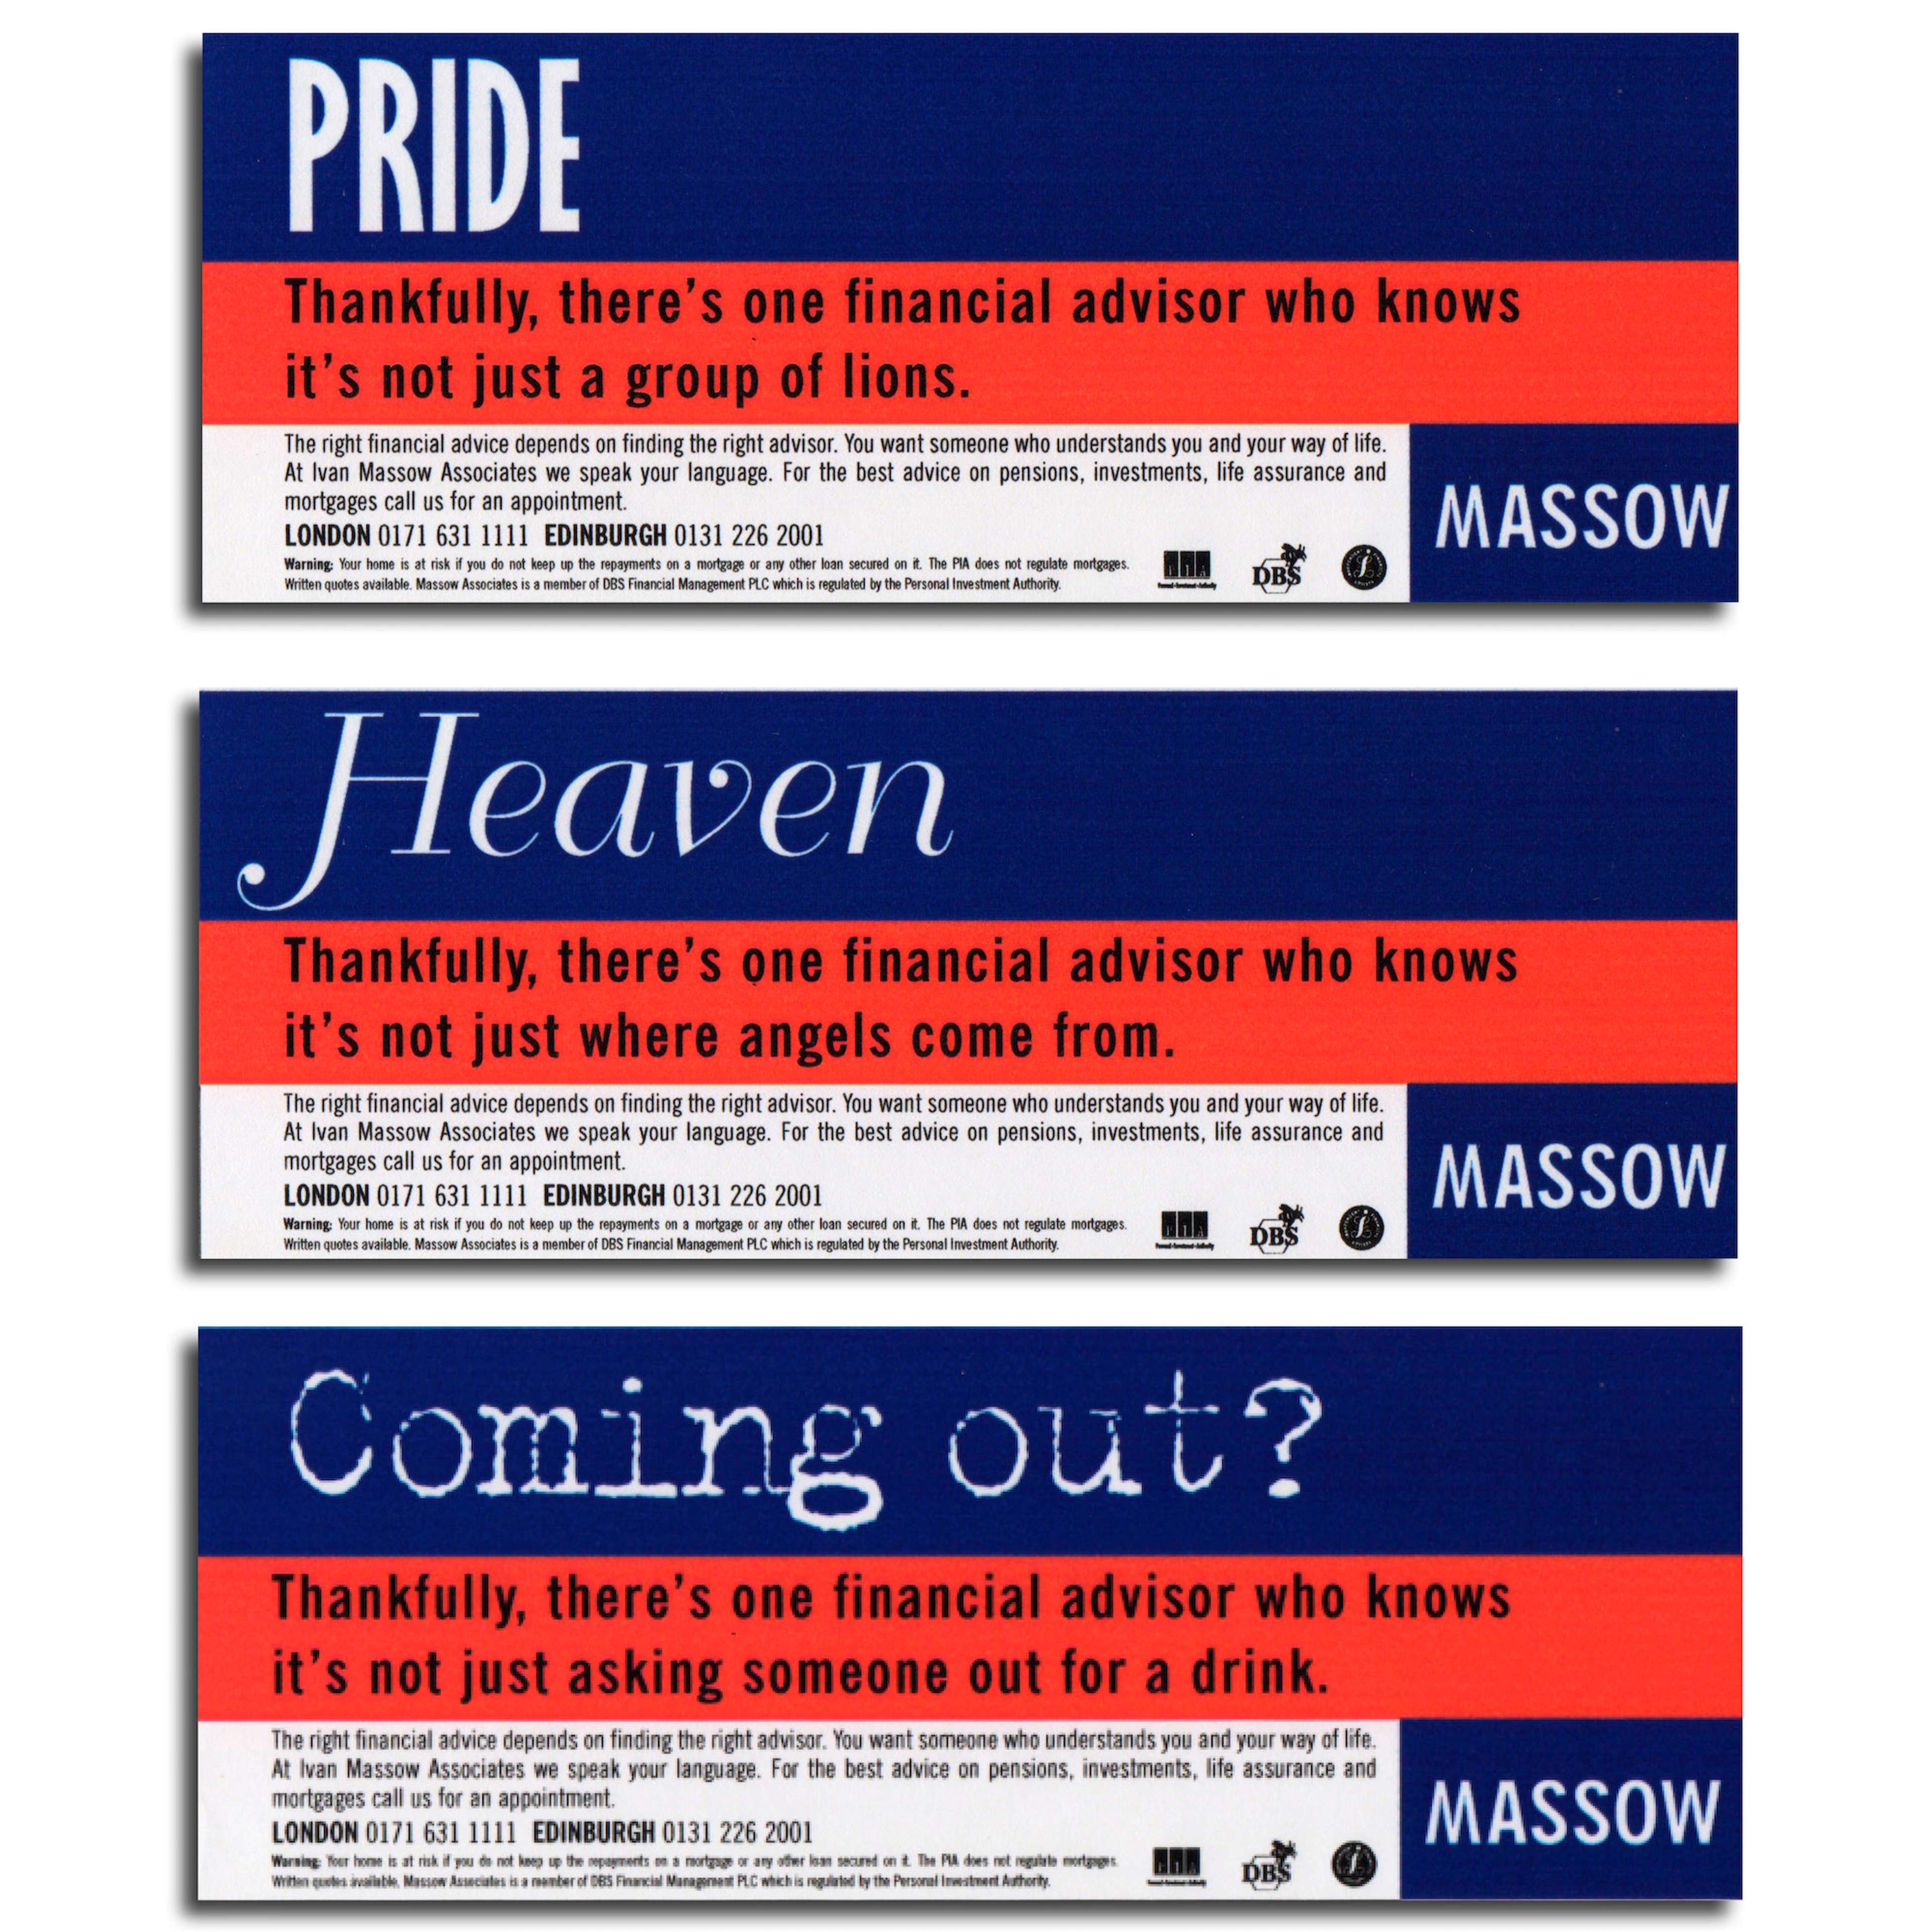 Ivan Massow press advertising campaign in the gay financial press.